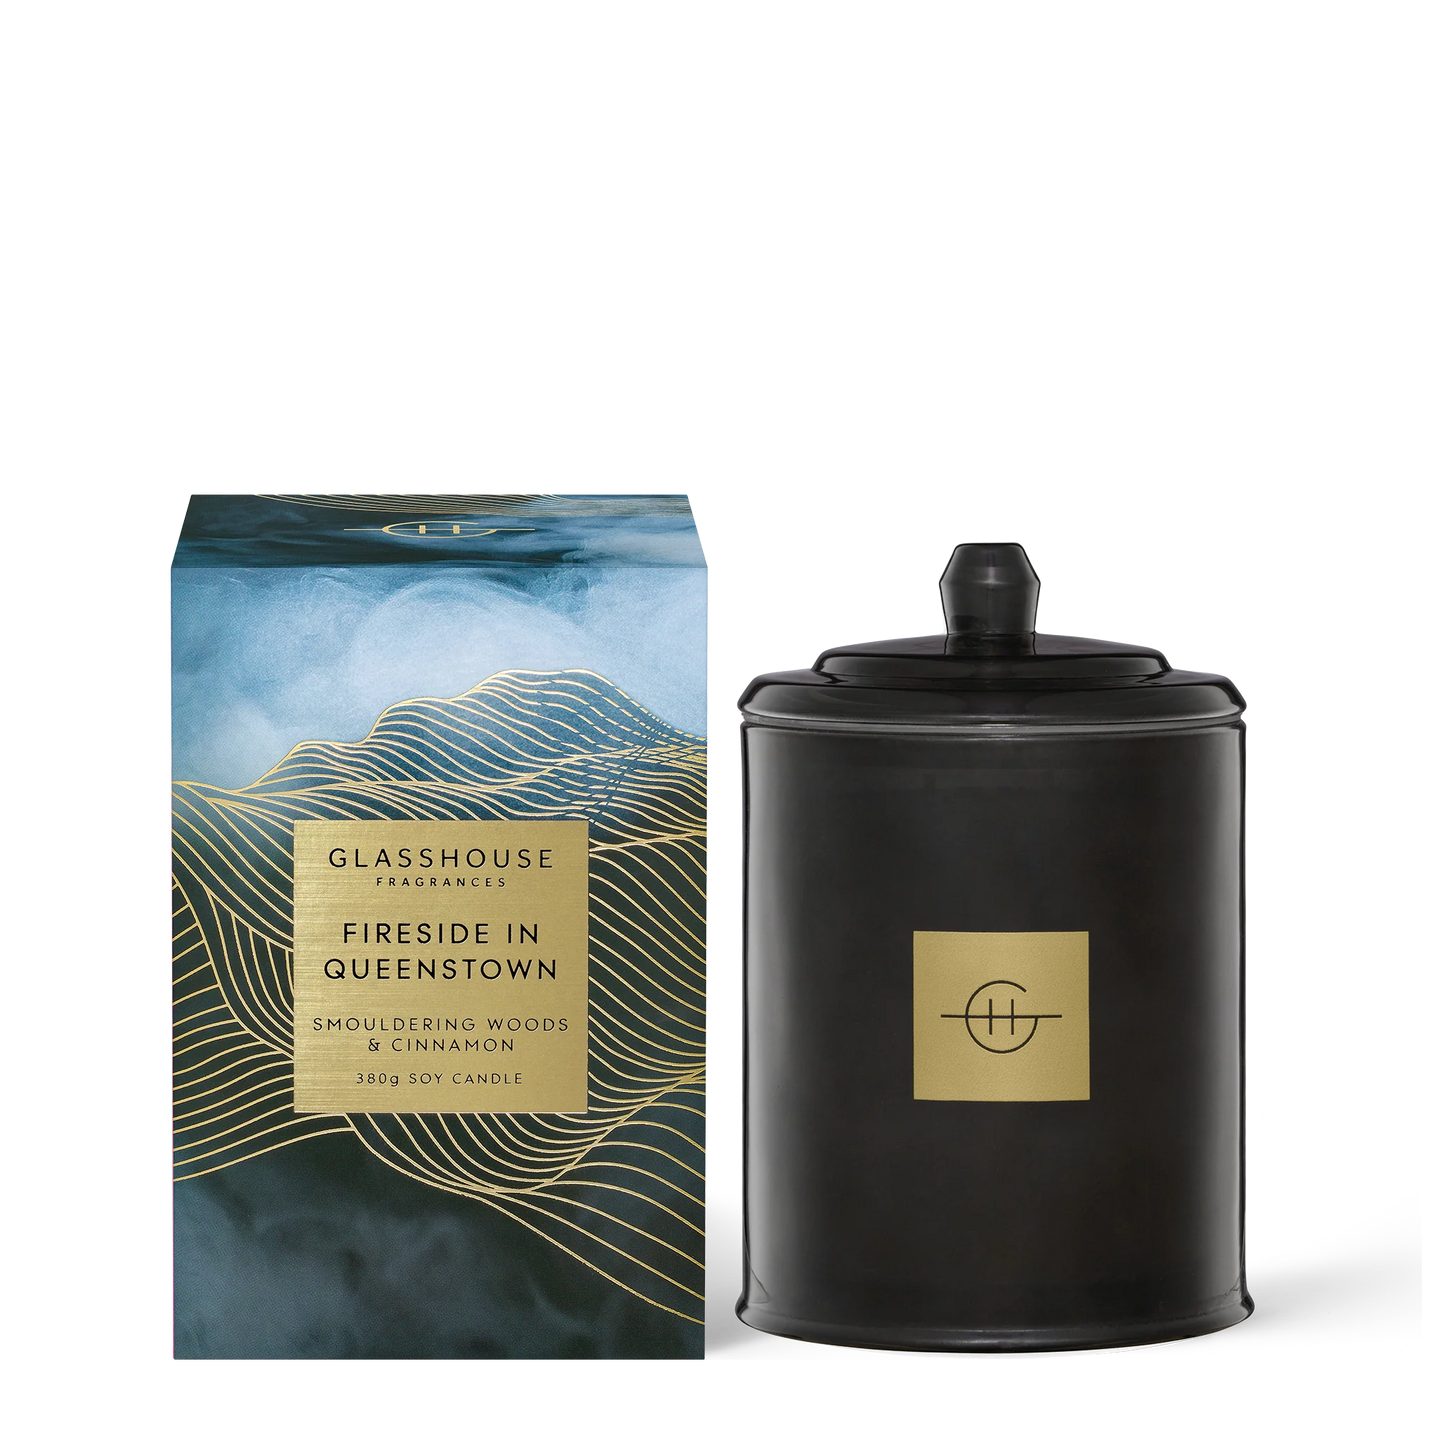 Limited Edition - Fireside In Queenstown - Glasshouse Candle